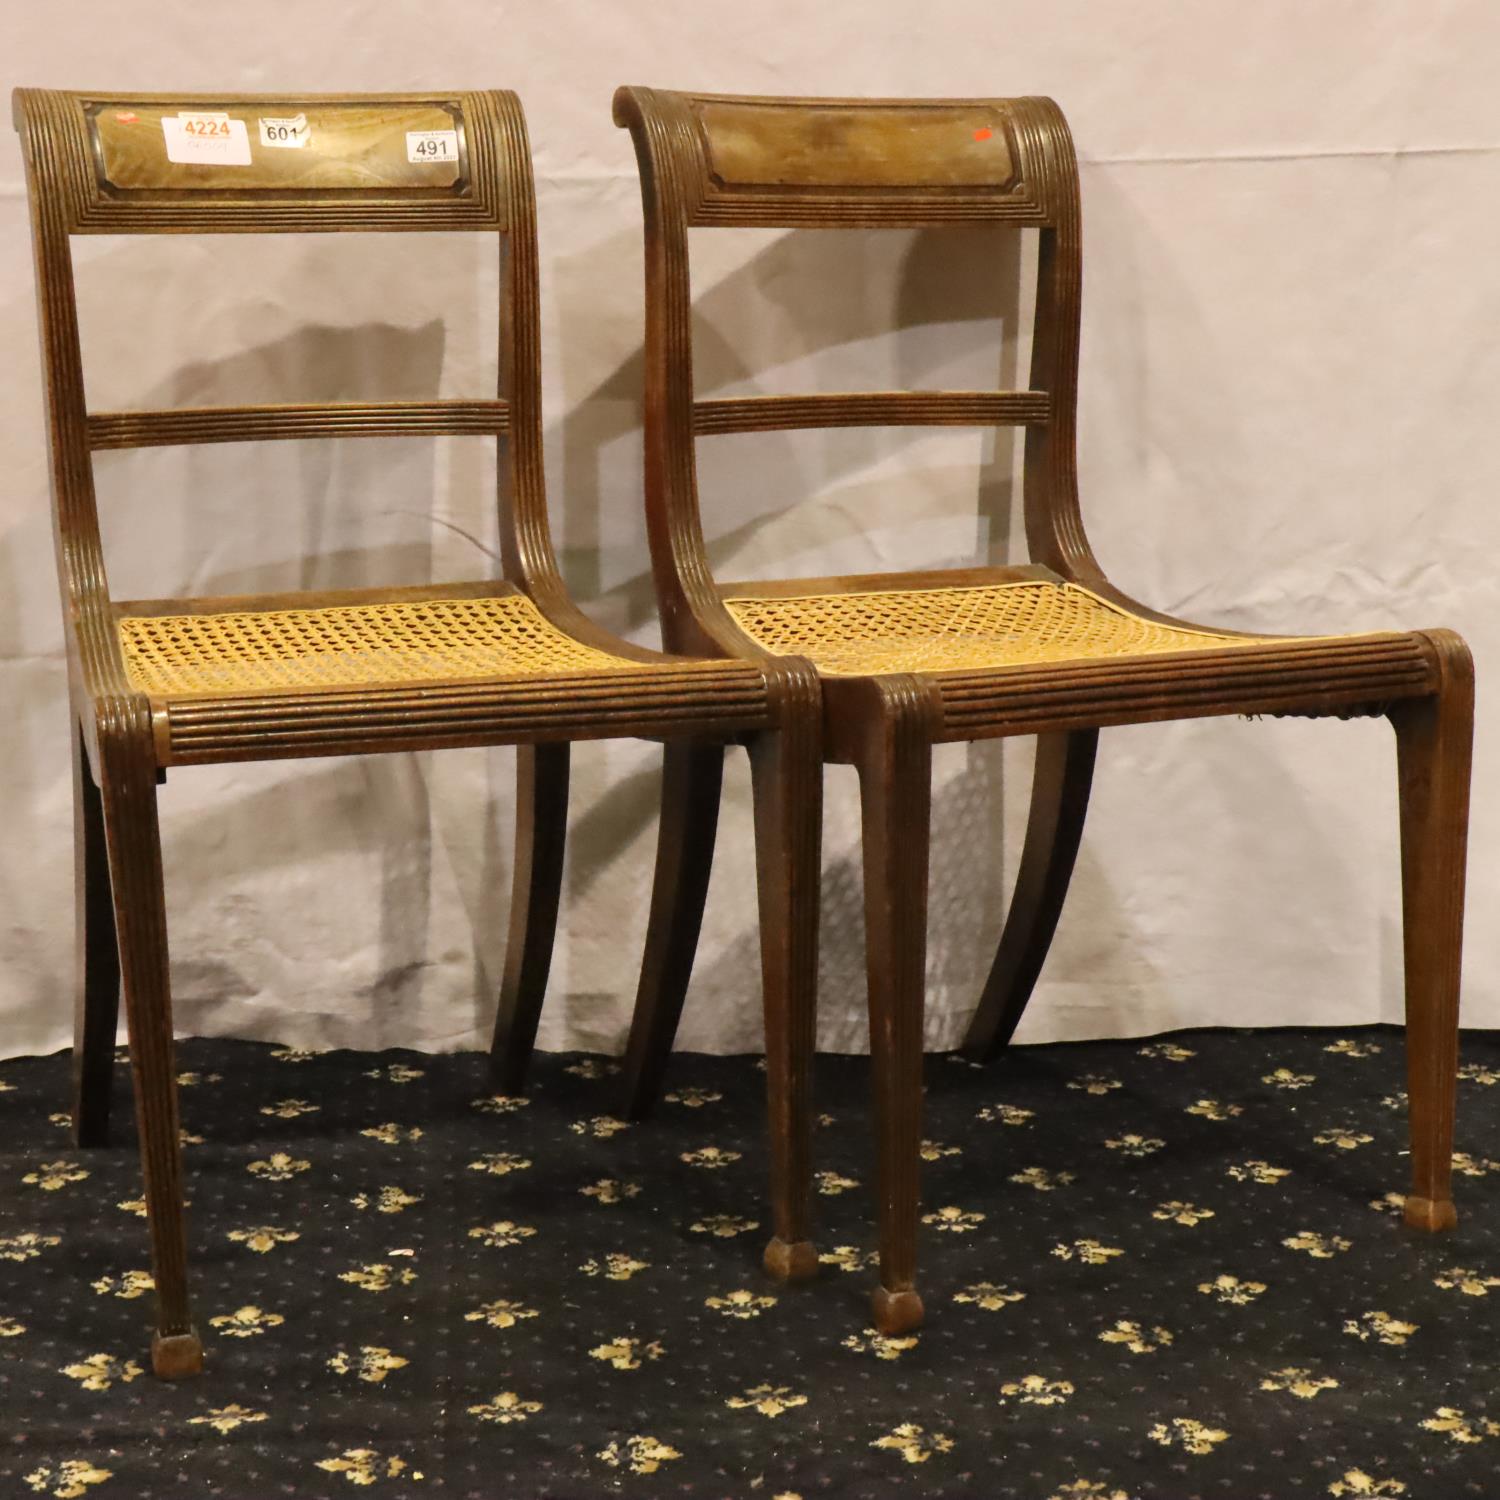 *** WITHDRAWN *** A pair of Regency period walnut framed chairs, each with bar-back